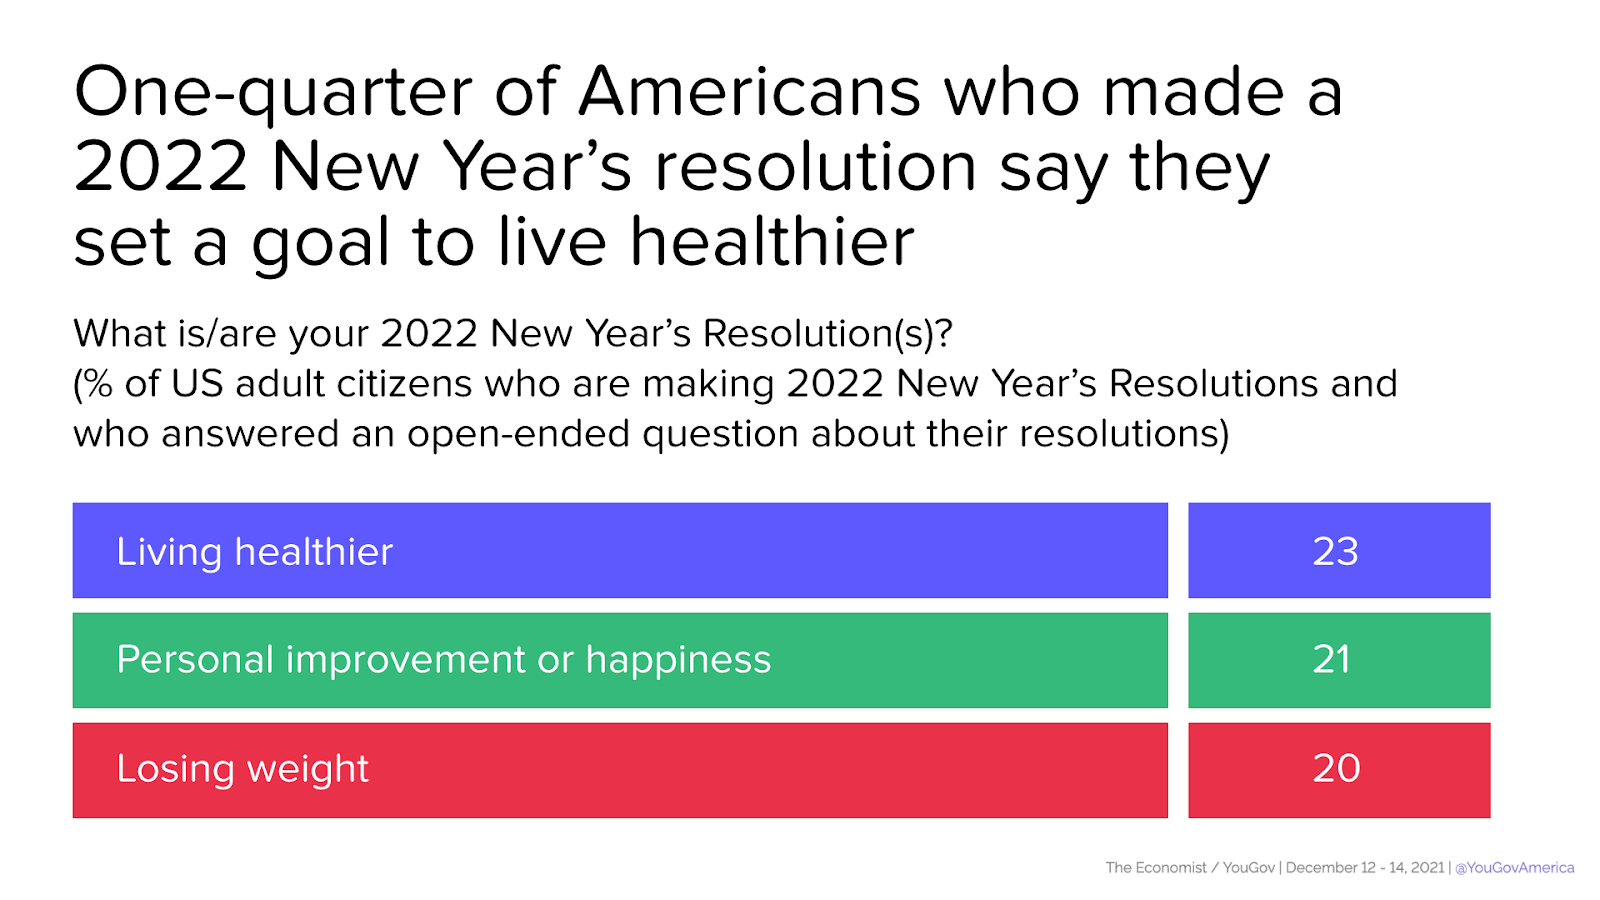 Health-related New Year’s resolutions were popular in 2022.
